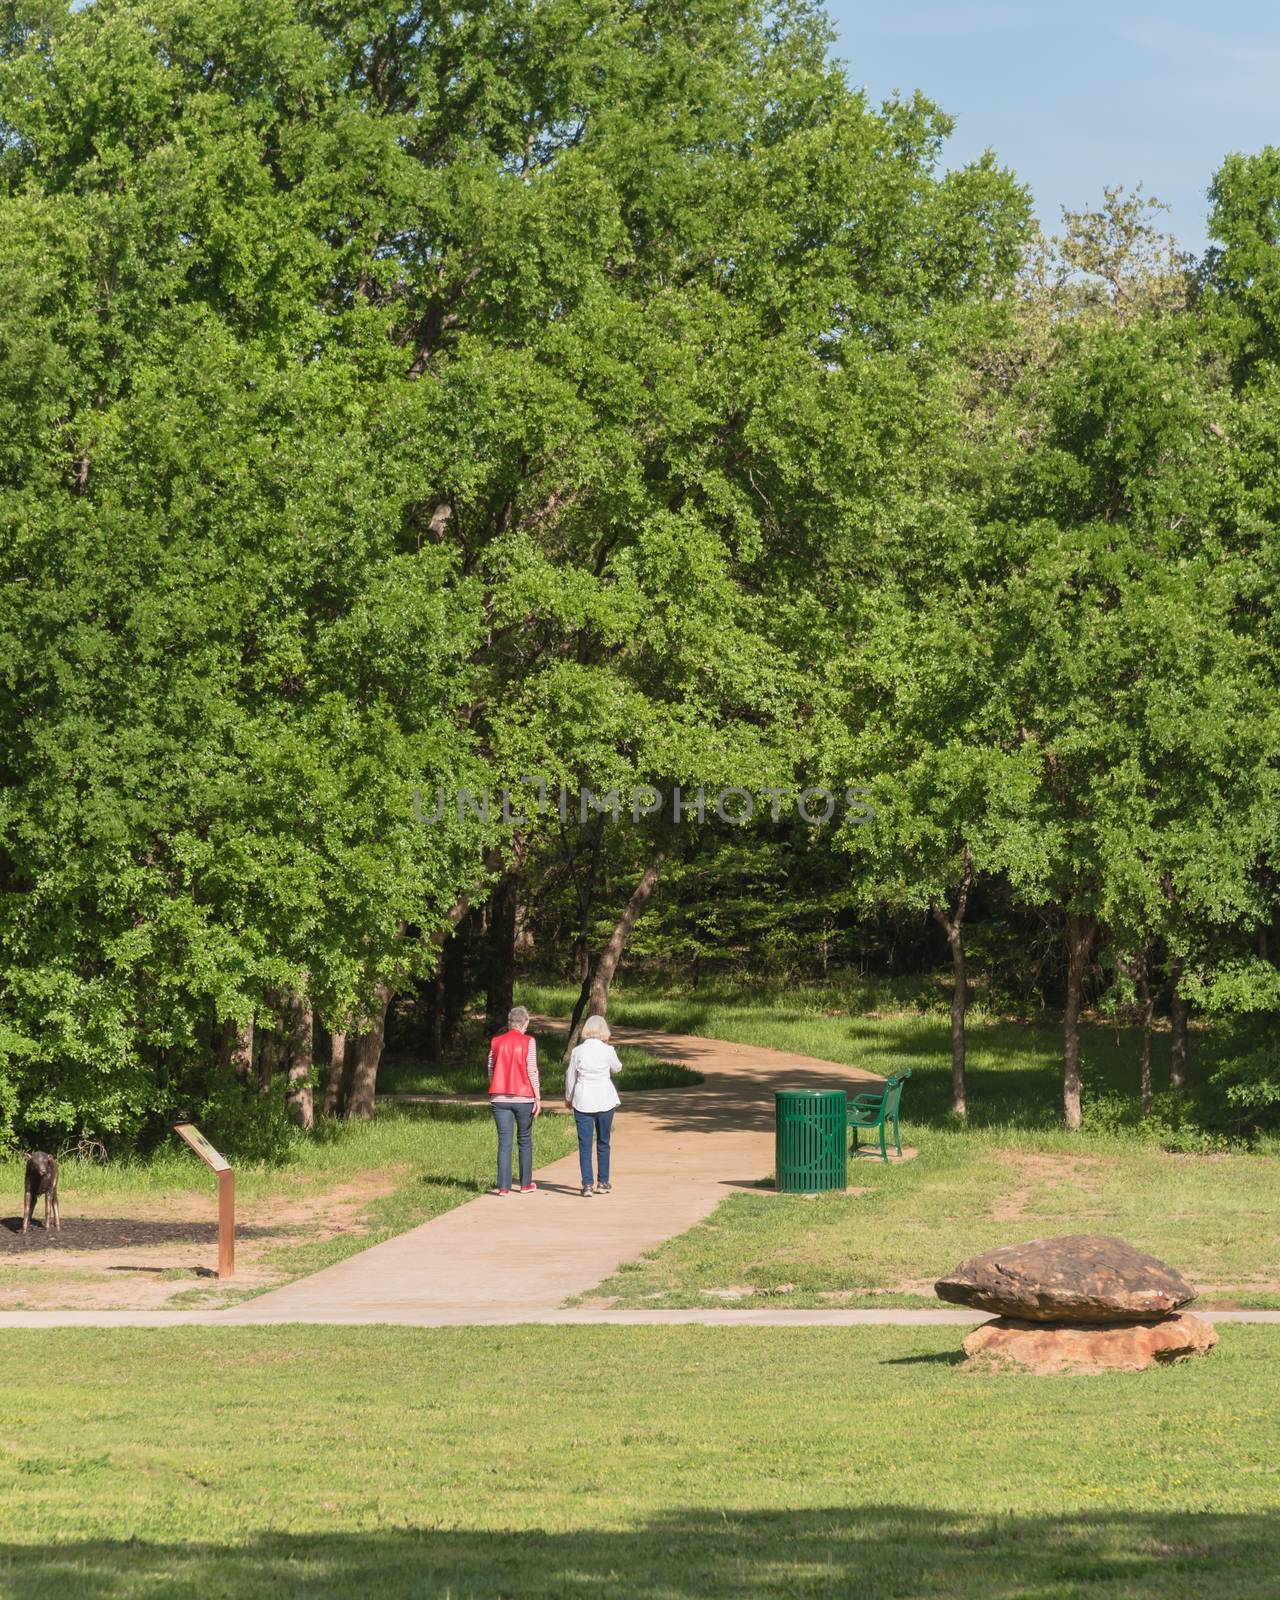 Rear view of senior Caucasian female couple walking in the park. Nature recreation area with trail, trees, bench, trash bin and decorative landscape rock, boulder. Happy retirement concept